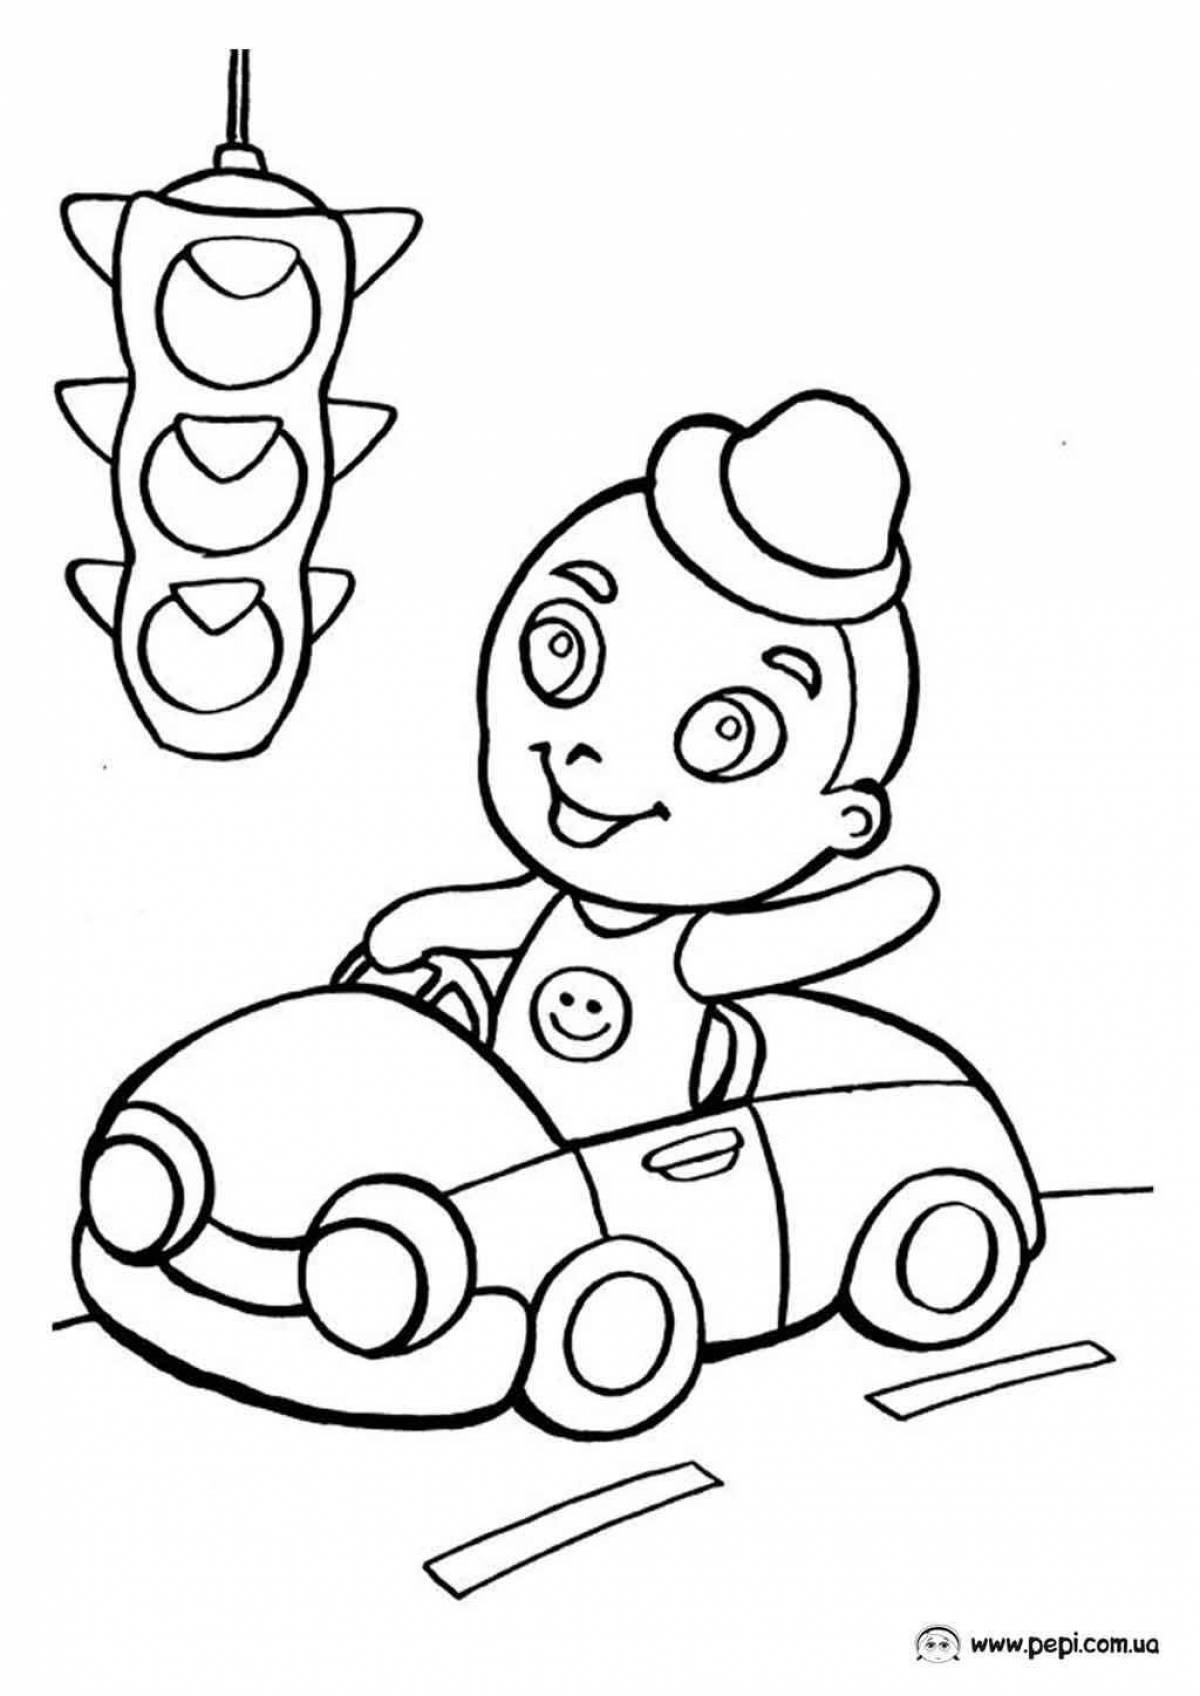 Tempting traffic rules coloring pages for preschoolers